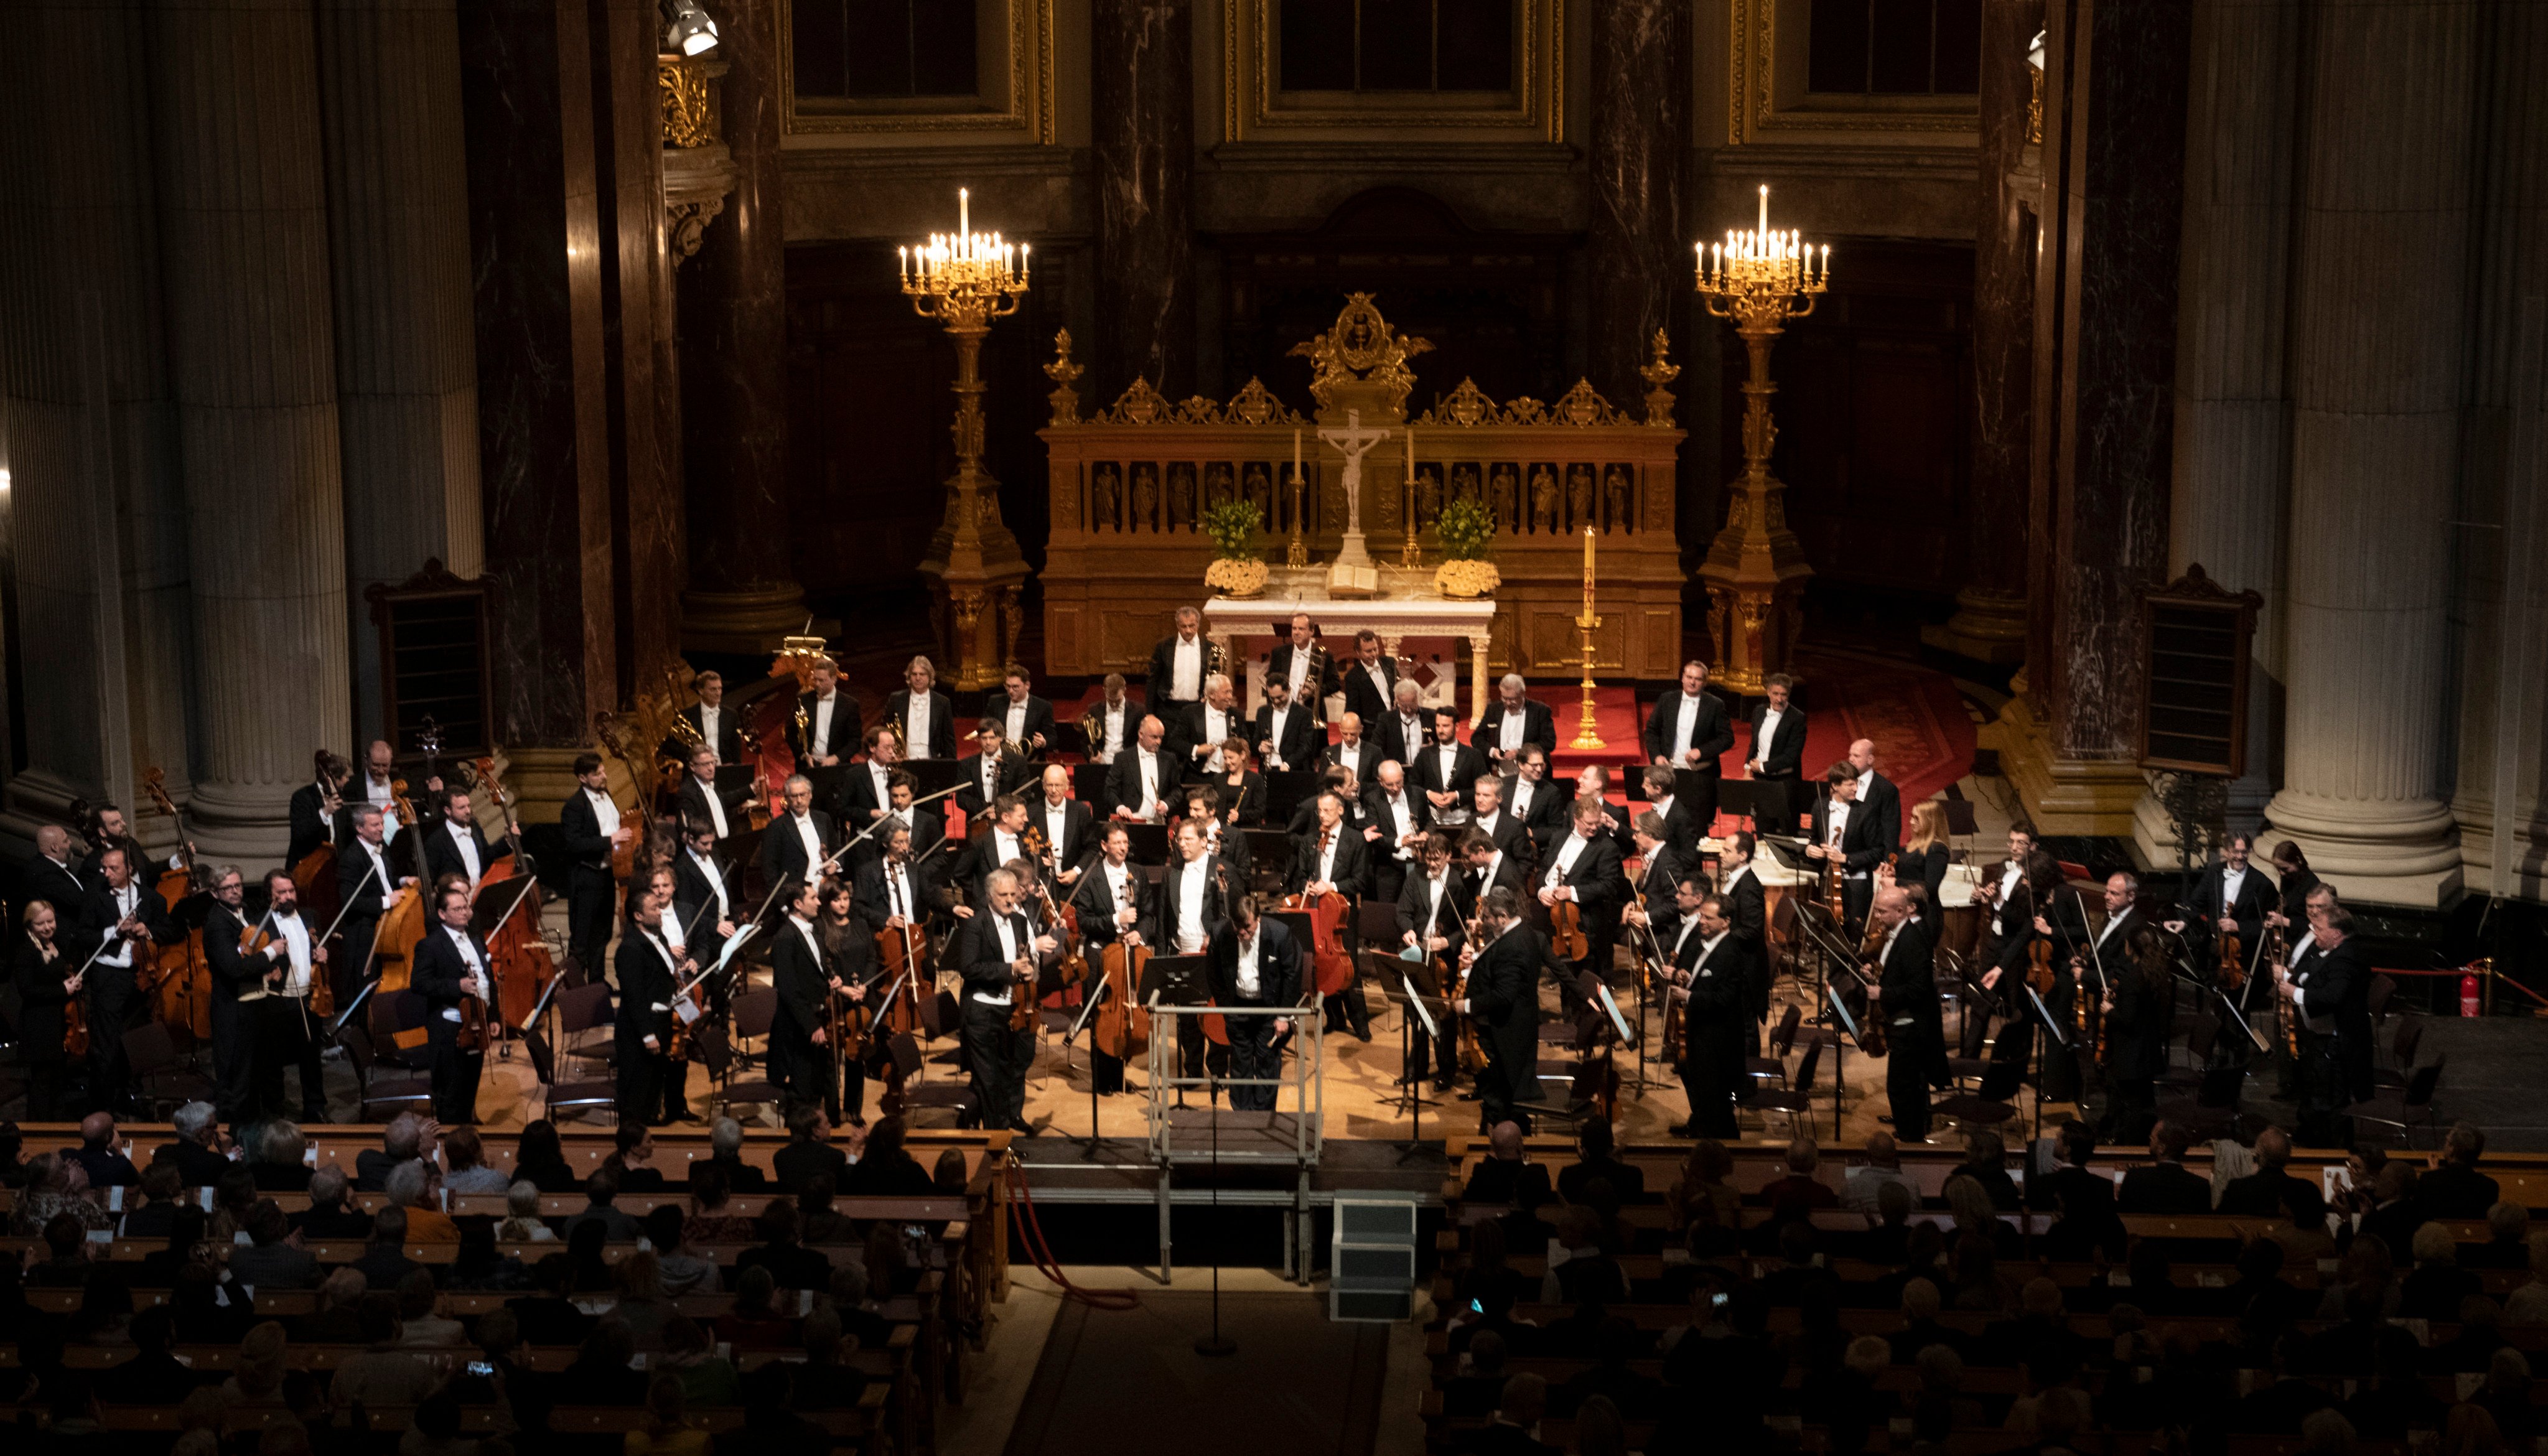 Members of the Vienna Philharmonic after a performance in Berlin Cathedral. The orchestra, which was all male until 1997, now has 24 woman players. Photo: Getty Images